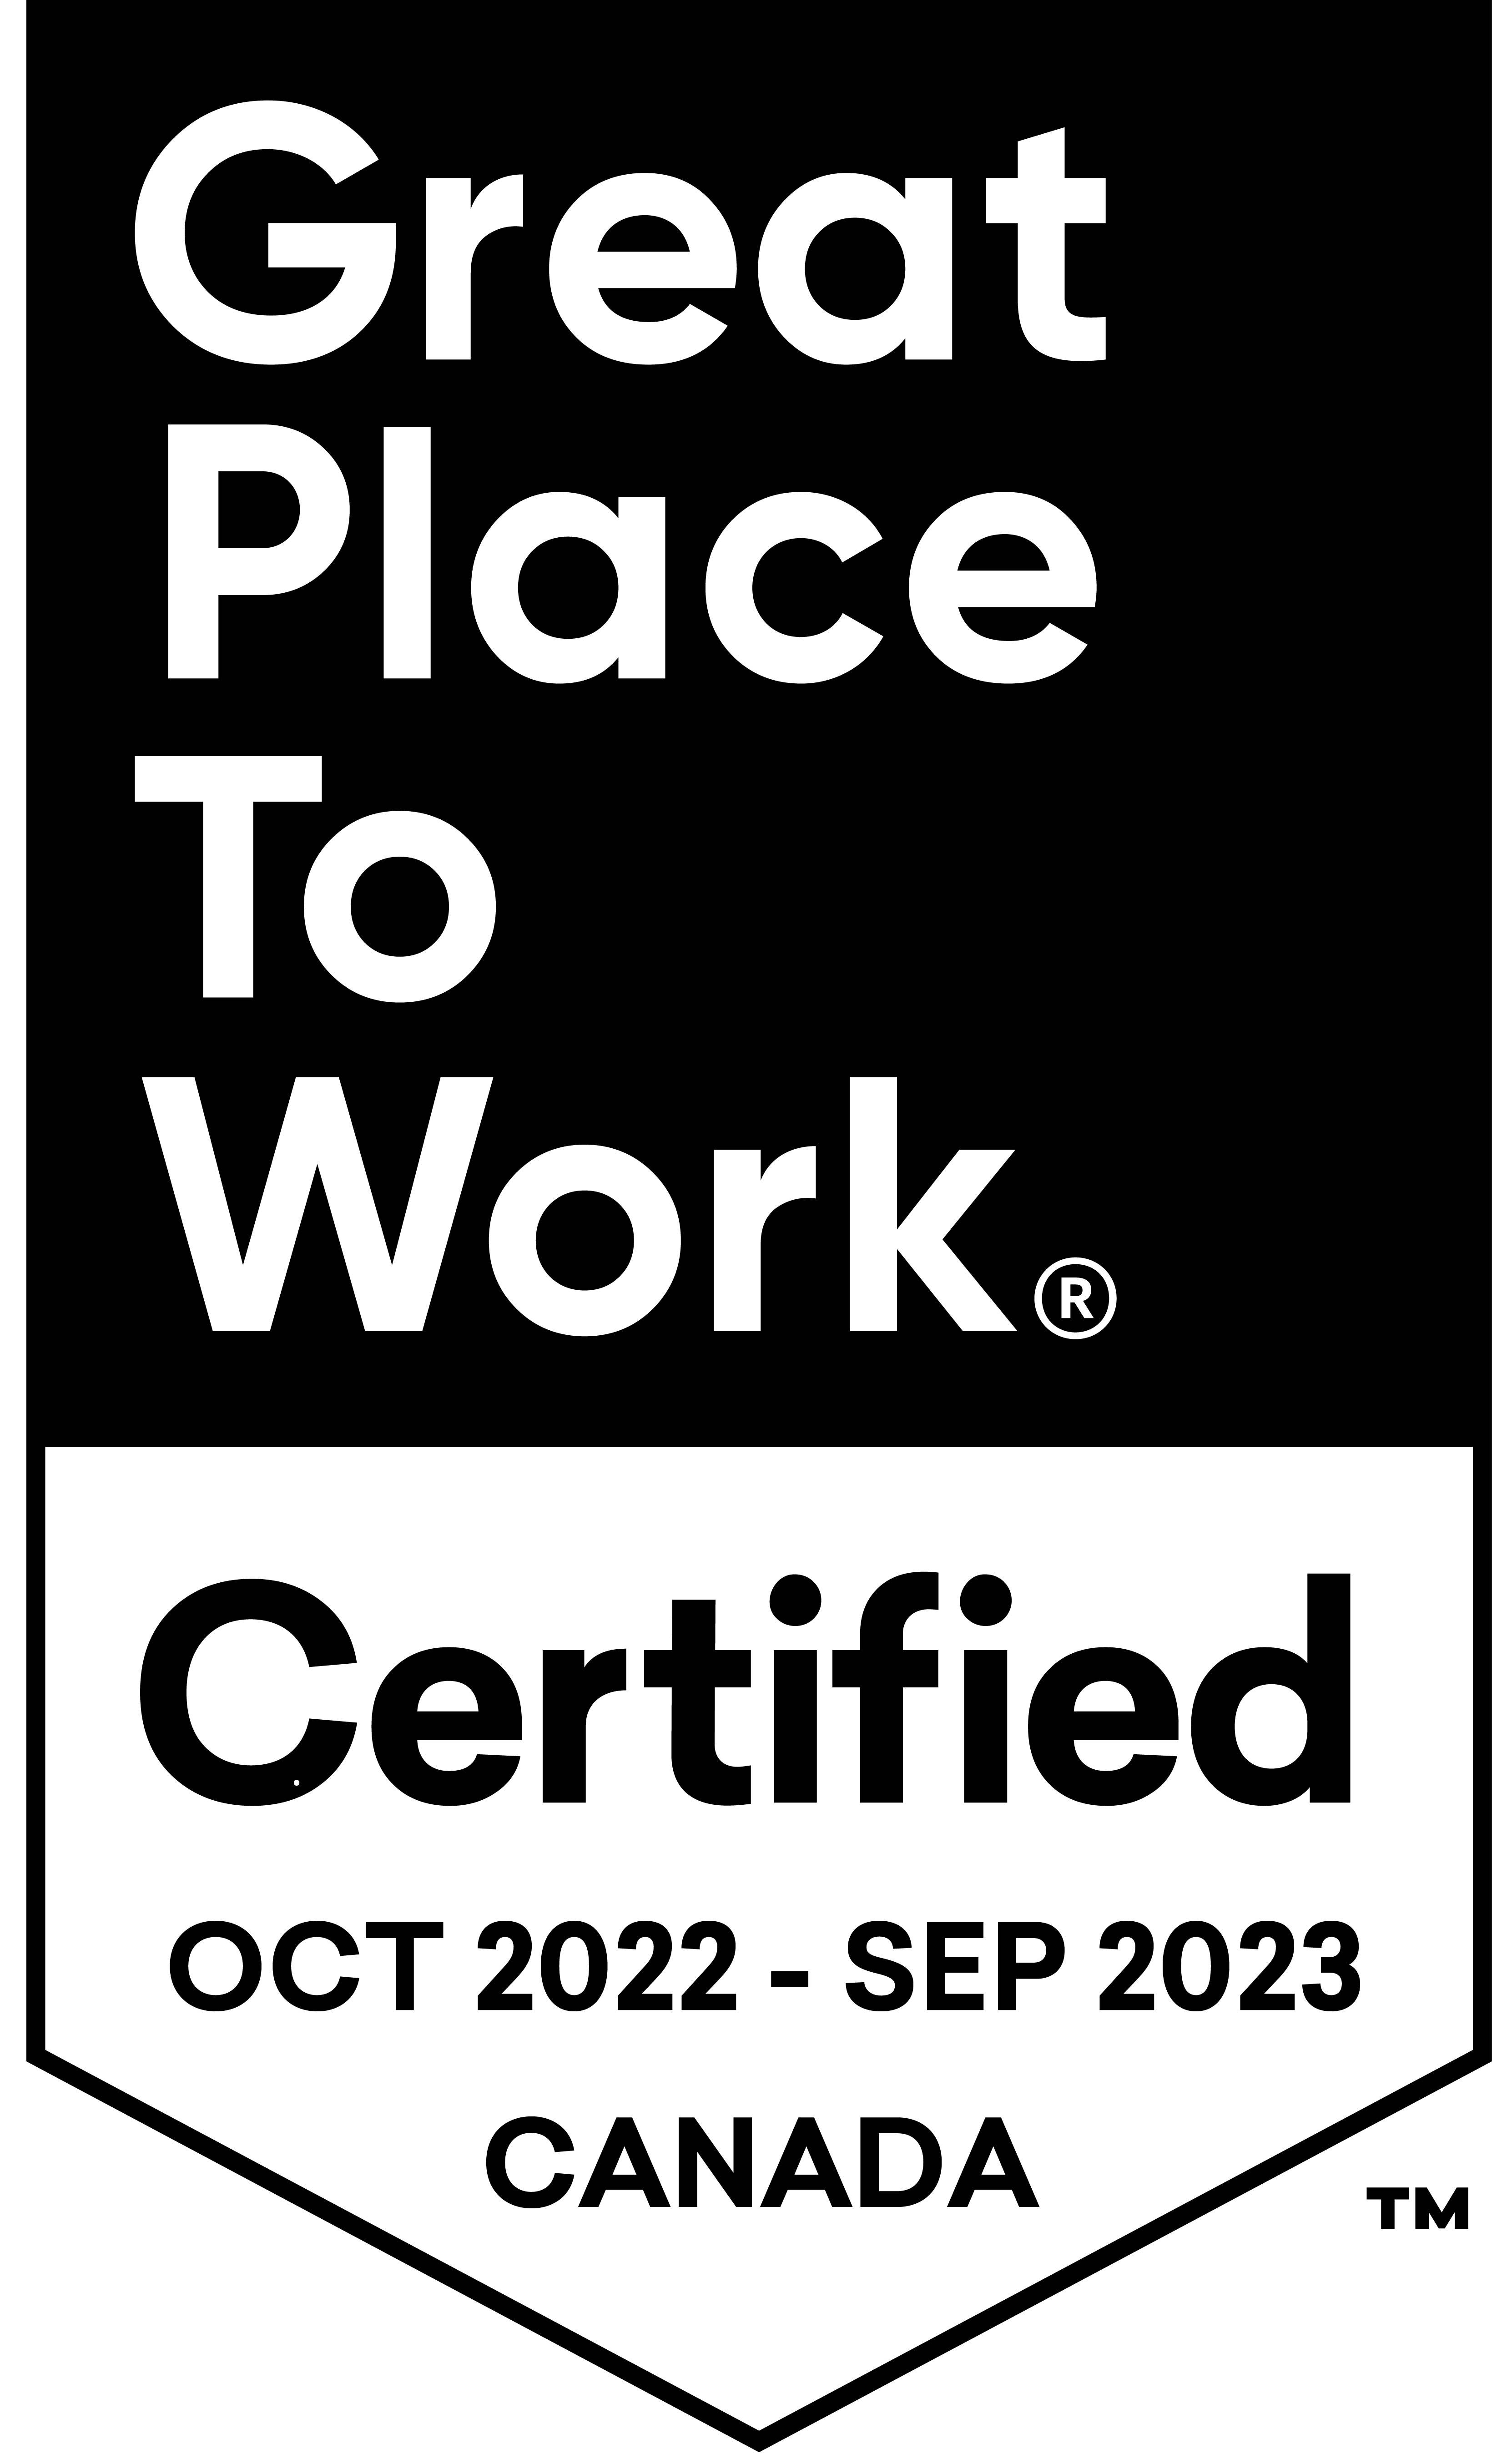 Great palce to work certification badge